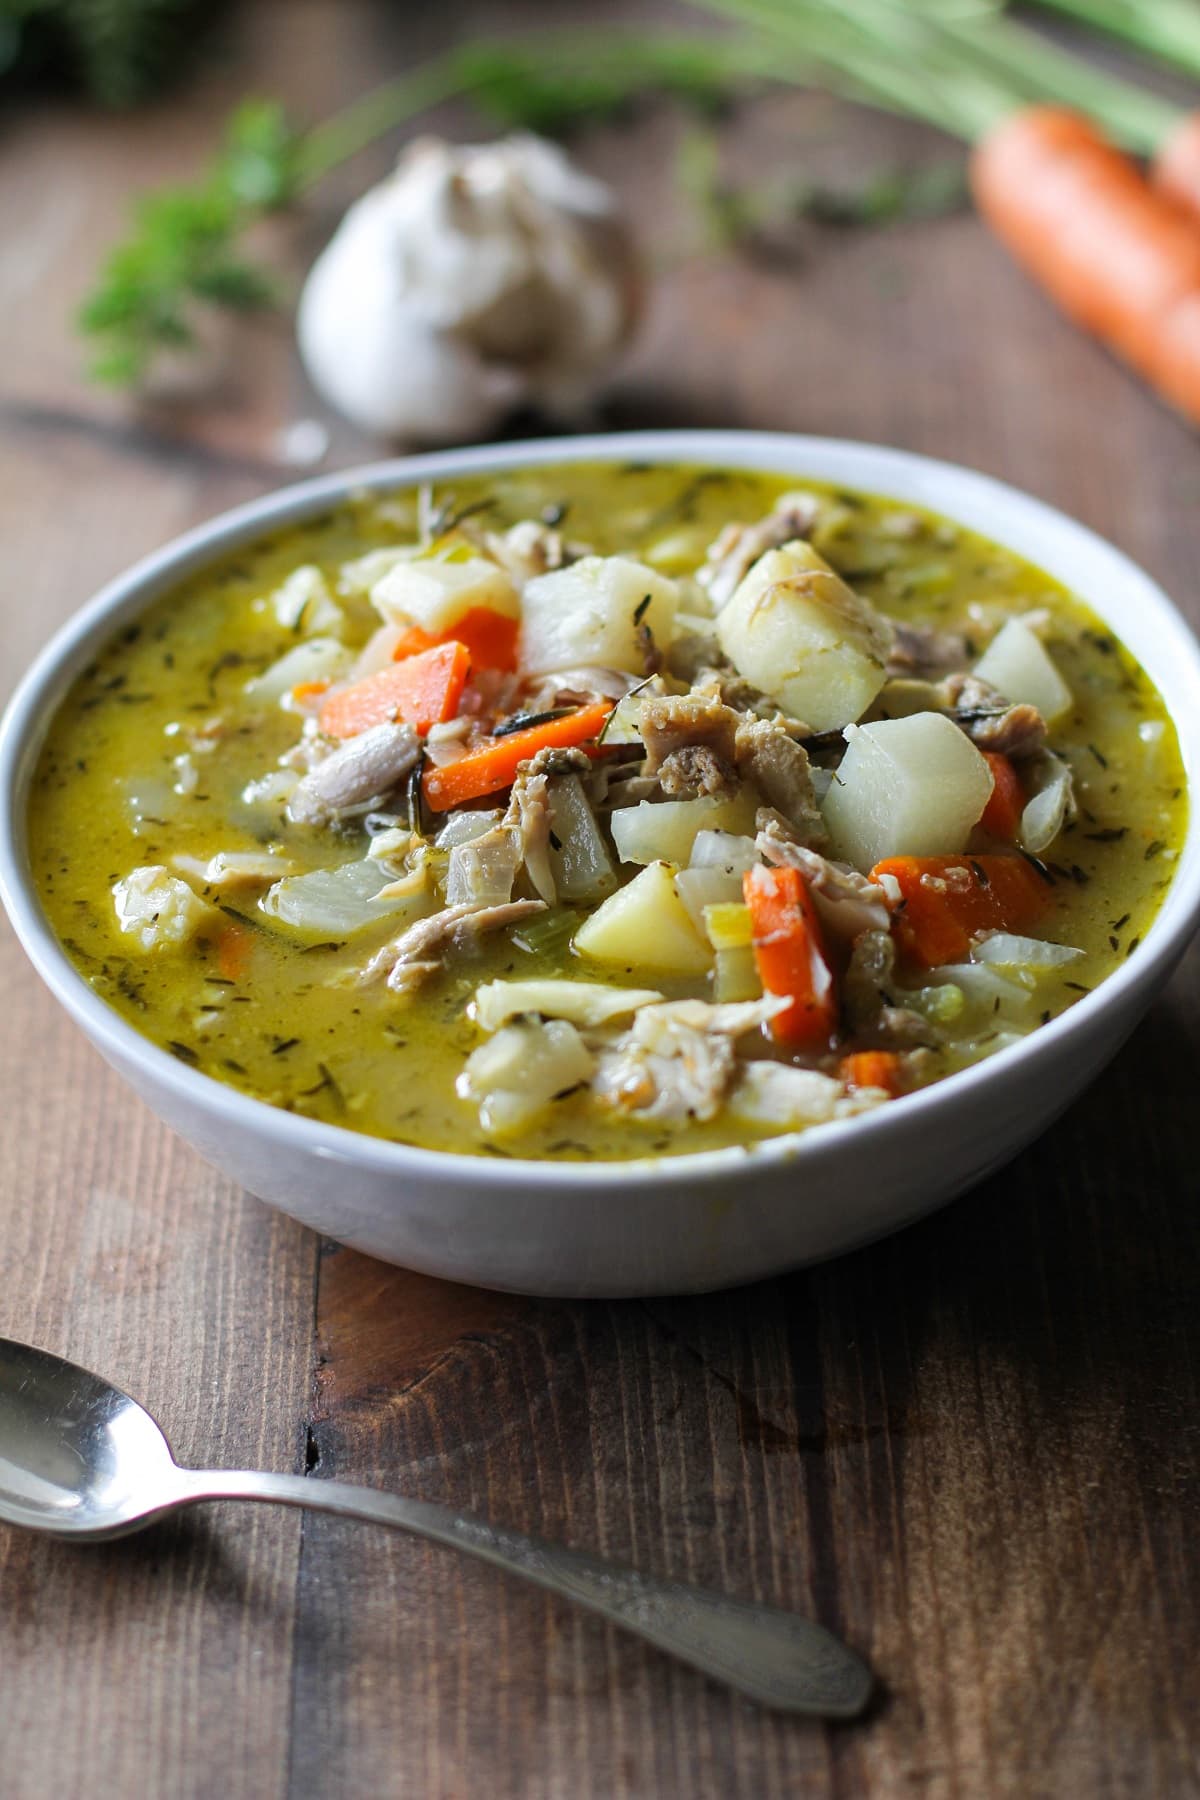 https://www.theroastedroot.net/wp-content/uploads/2014/12/leftover-turkey-soup-with-root-vegetables-1.jpg